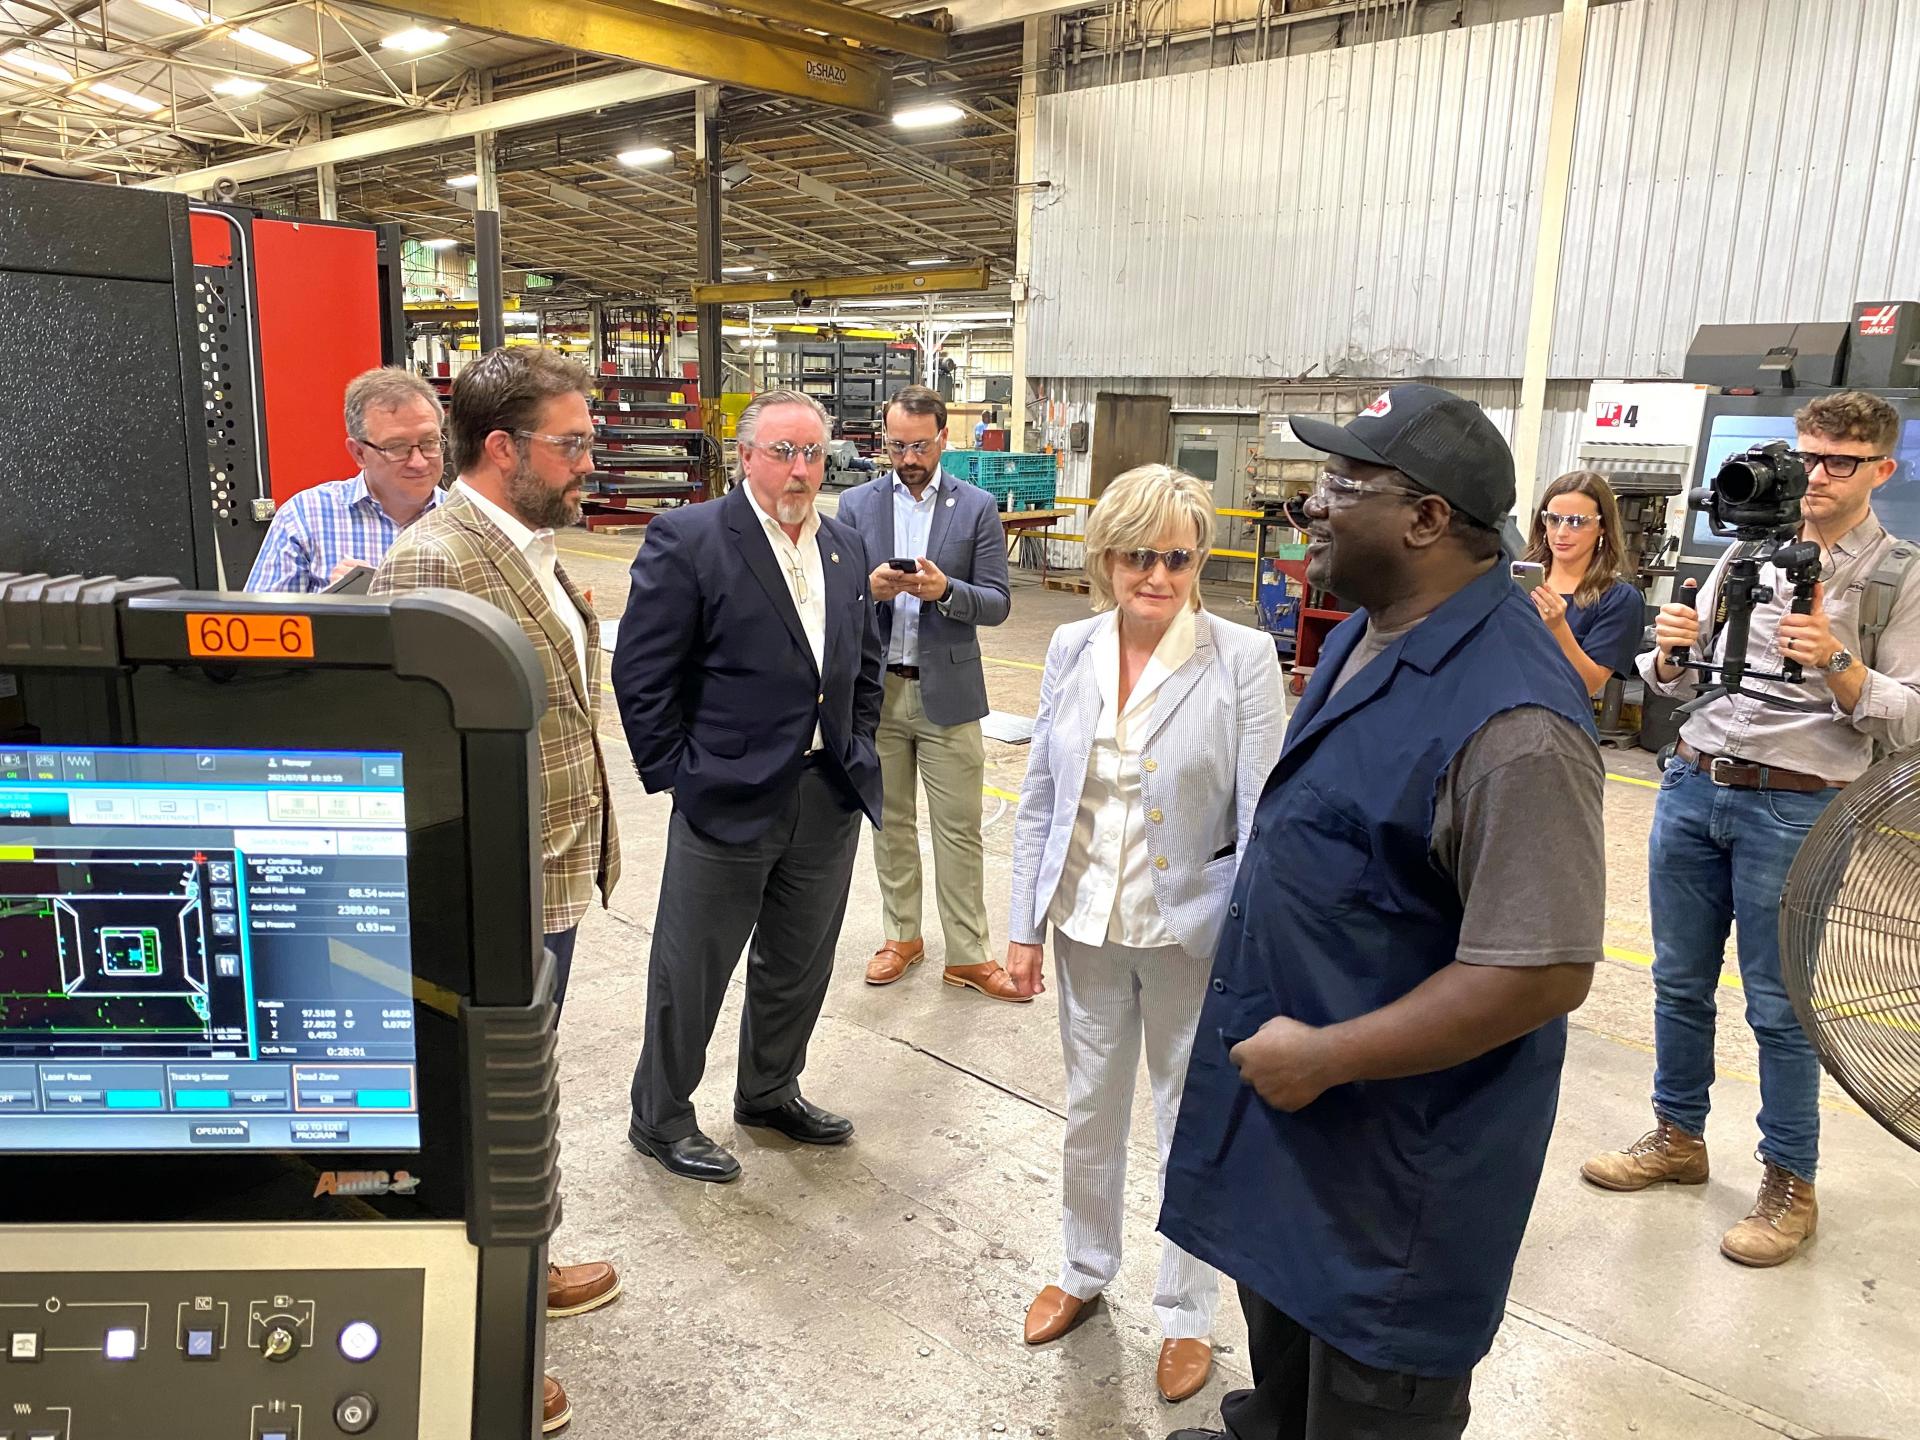 Senator Hyde-Smith visits with workers at Taylor Machine Works, an industrial equipment supplier in Louisville. (July 8, 2021)